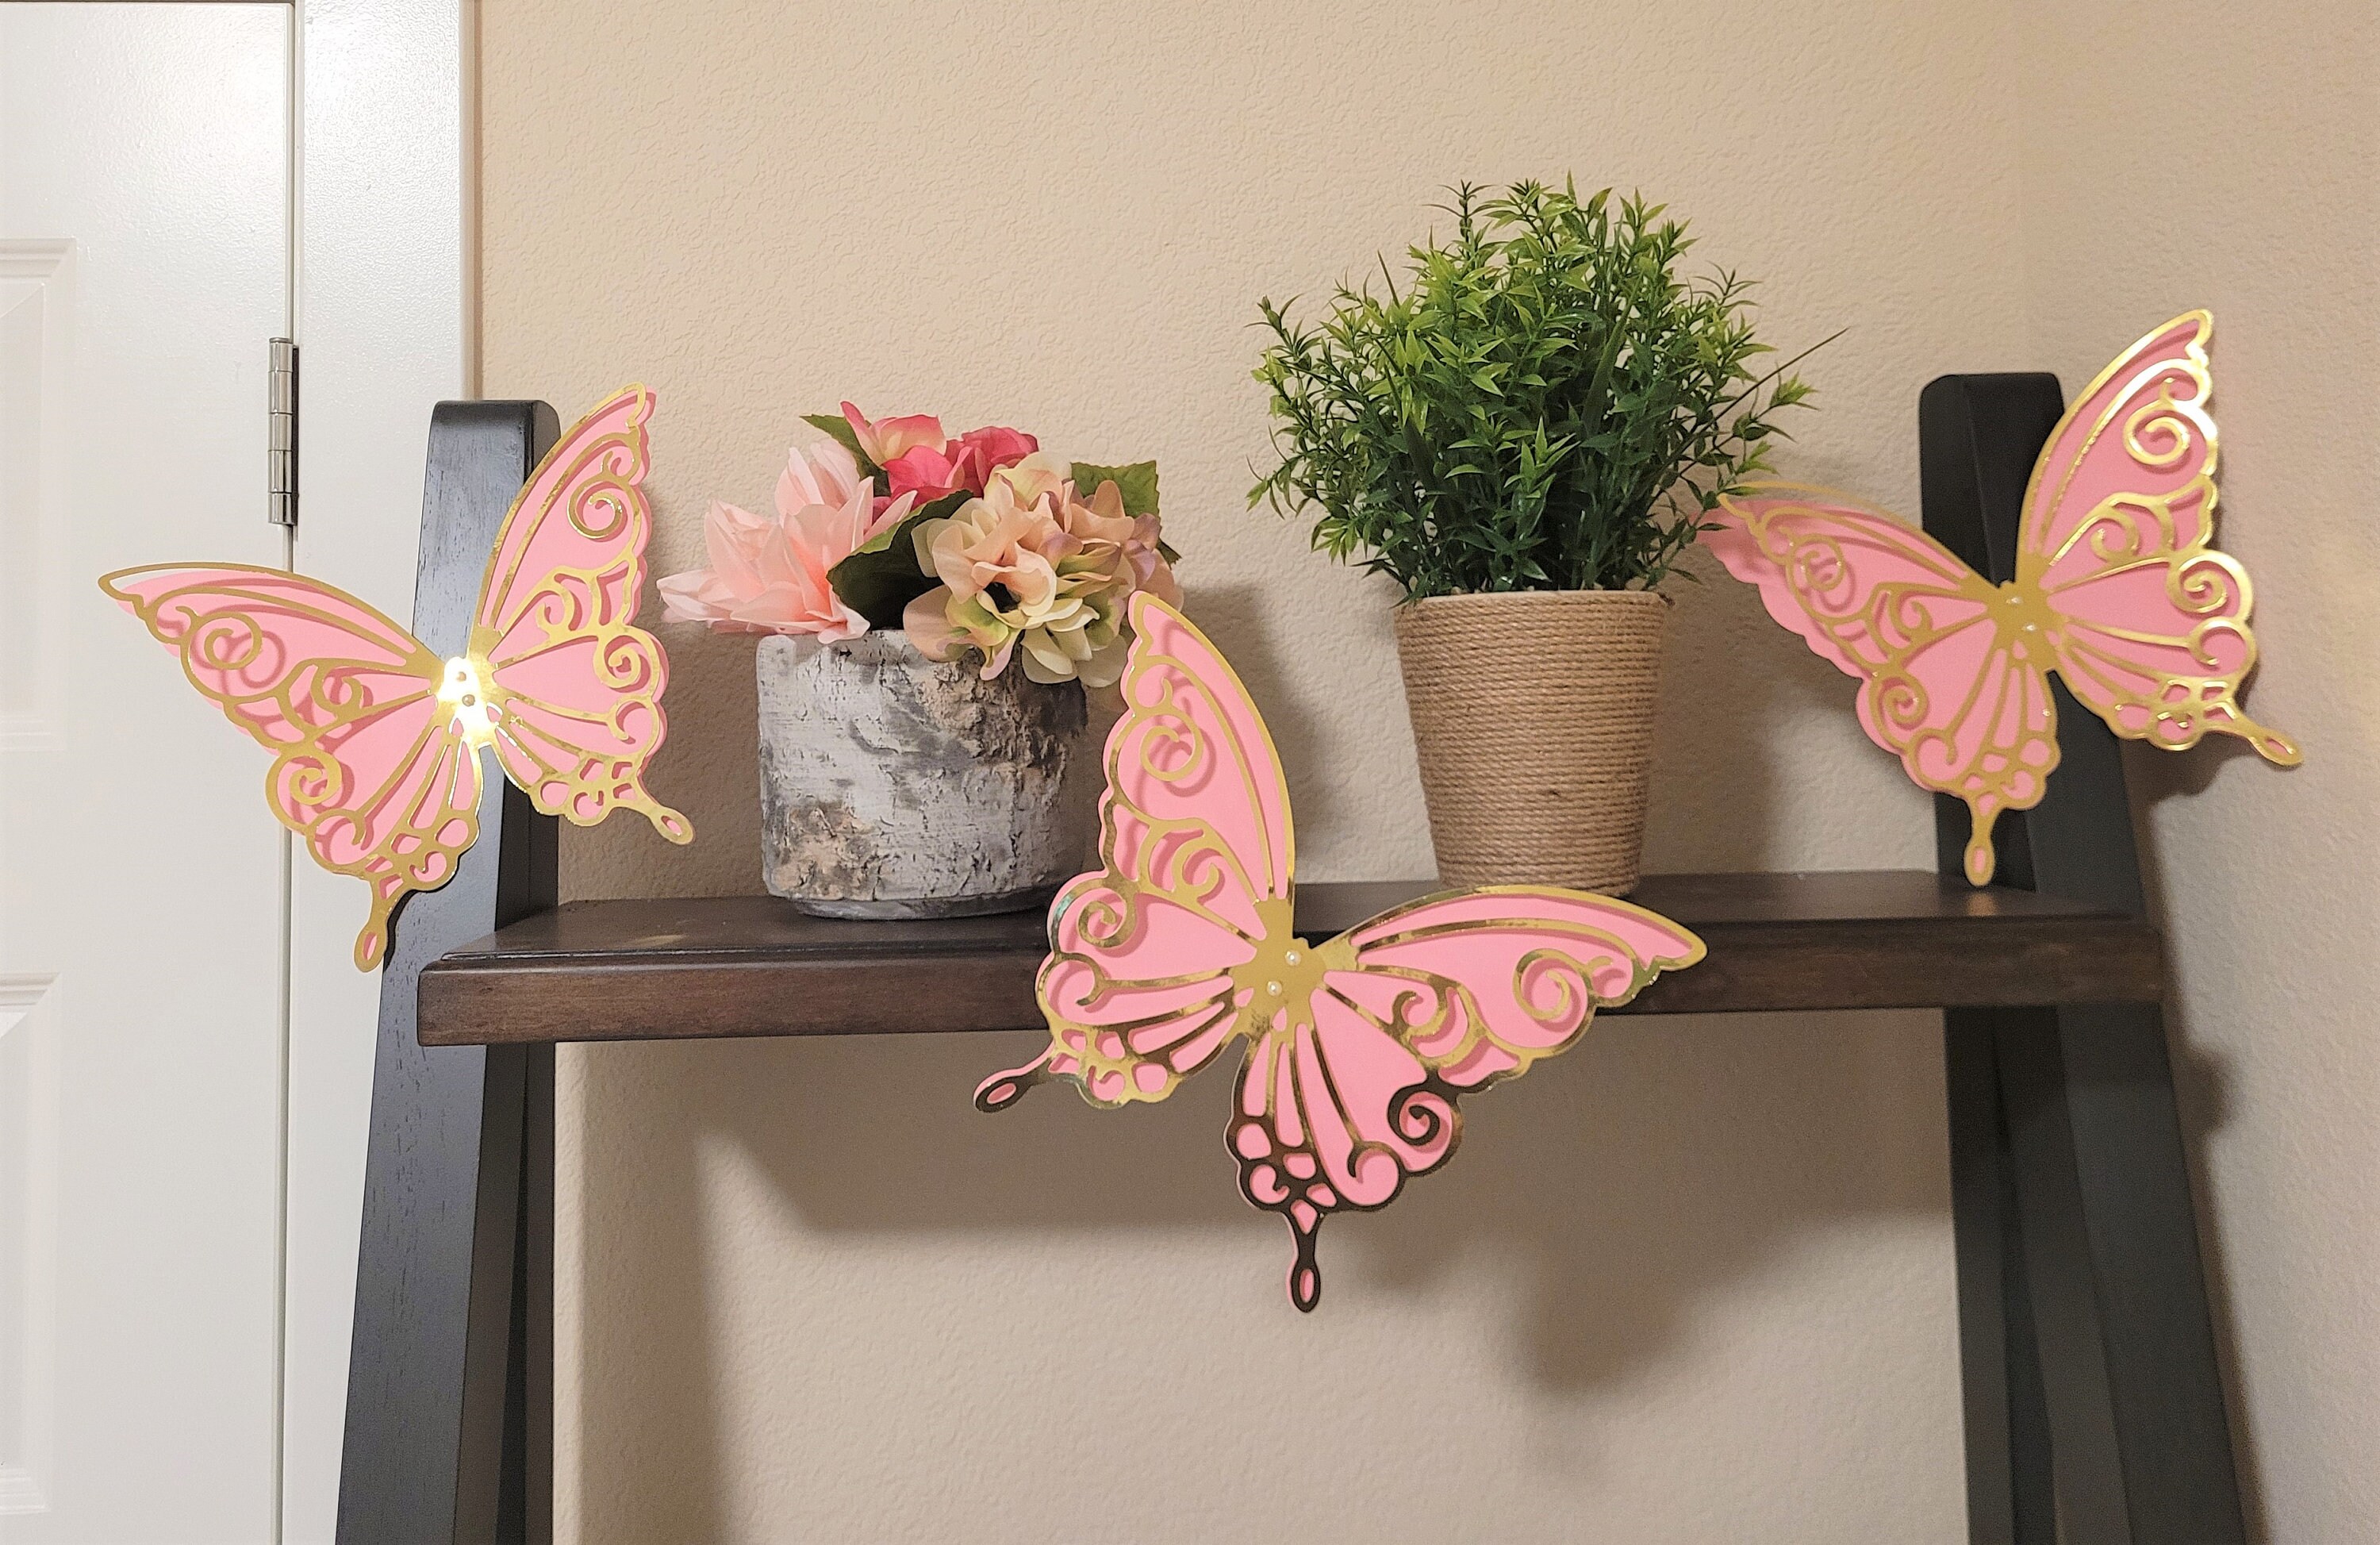  Kigeli 12 Pcs Large Gold Pink Butterfly Party Decoration  10,14,20 Inches Giant Paper Butterfly Decorations Butterfly Wall Decor 3D  for Birthday Baby Shower Nursery Girls Bedroom Wedding Prop : Home & Kitchen